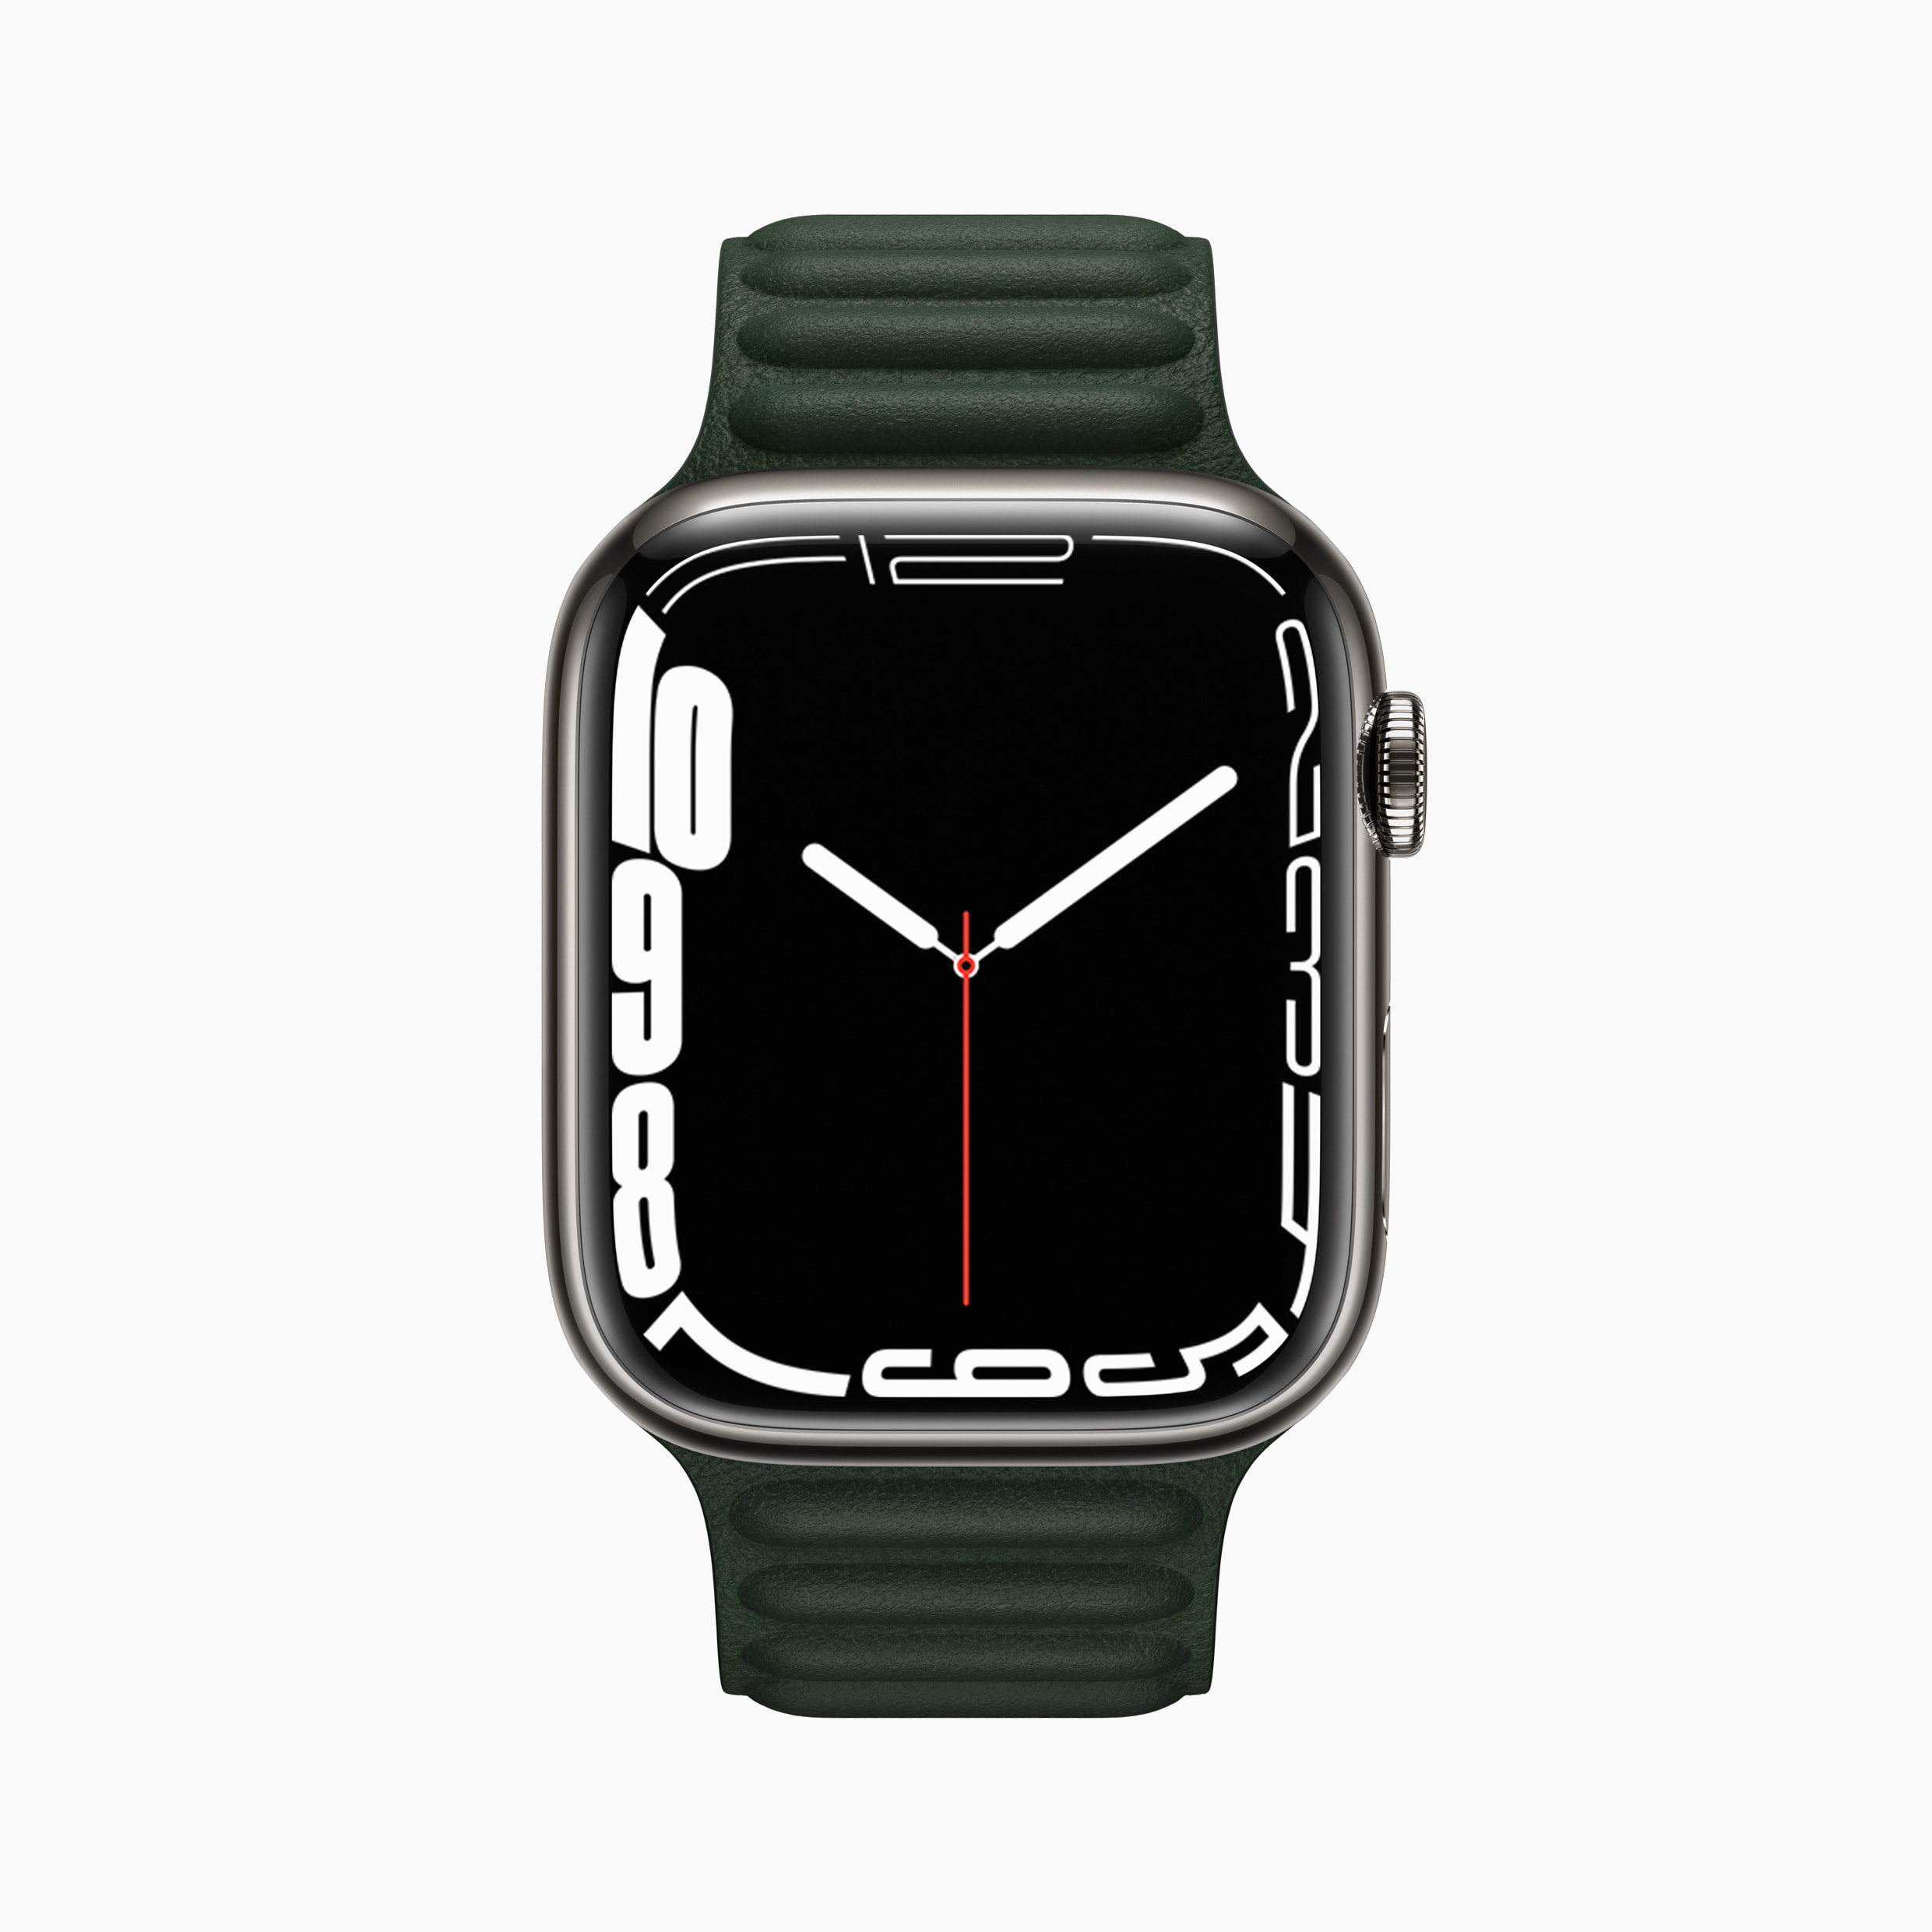 How to create your very own live wallpaper for the Apple Watch  SoyaCincau